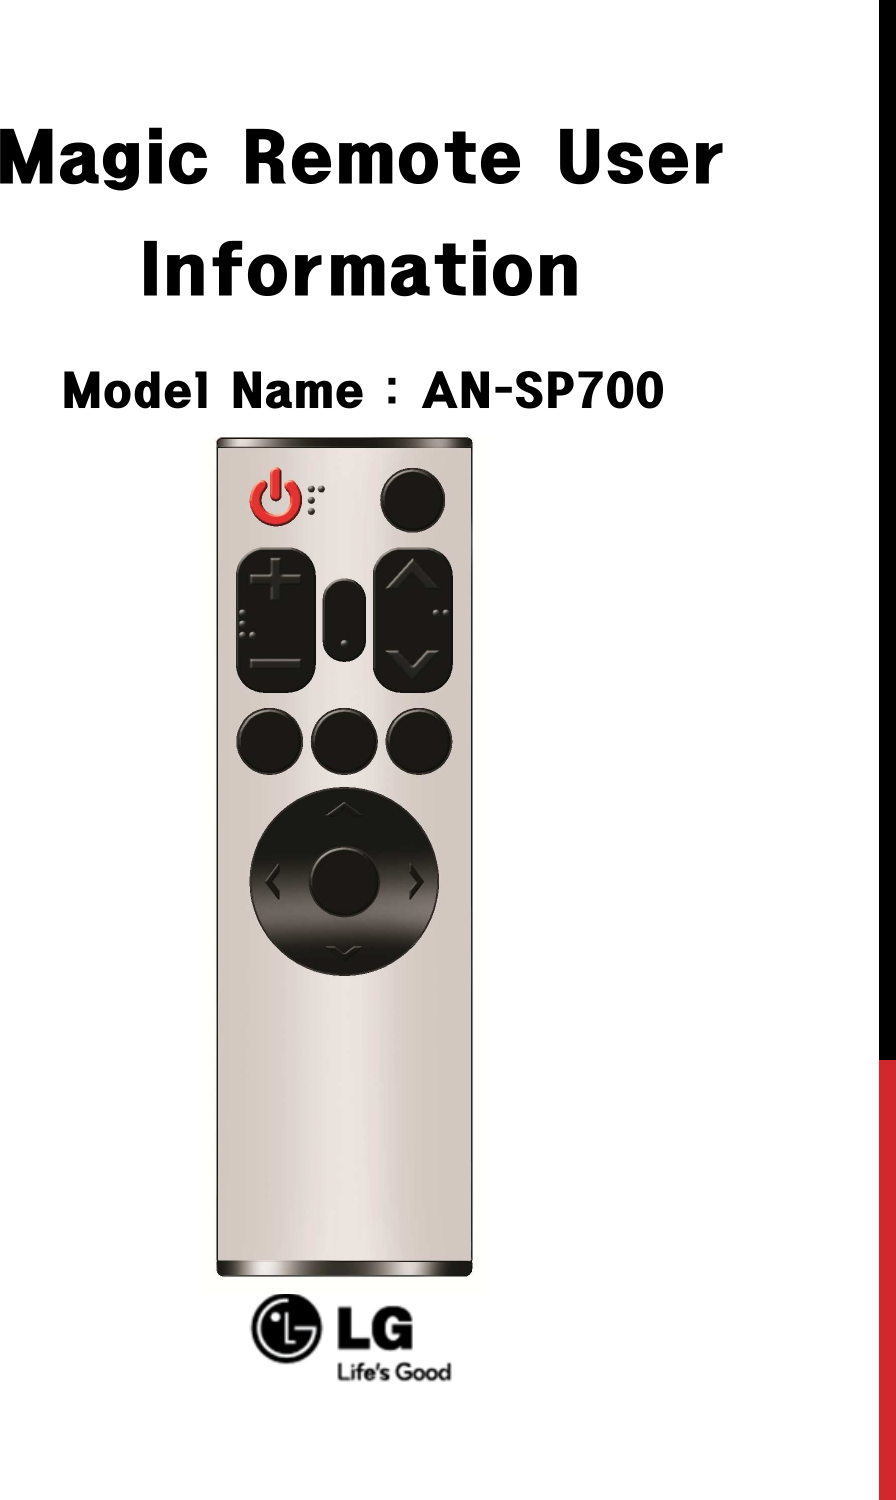 Magic Remote User InformationModel Name : AN-SP700